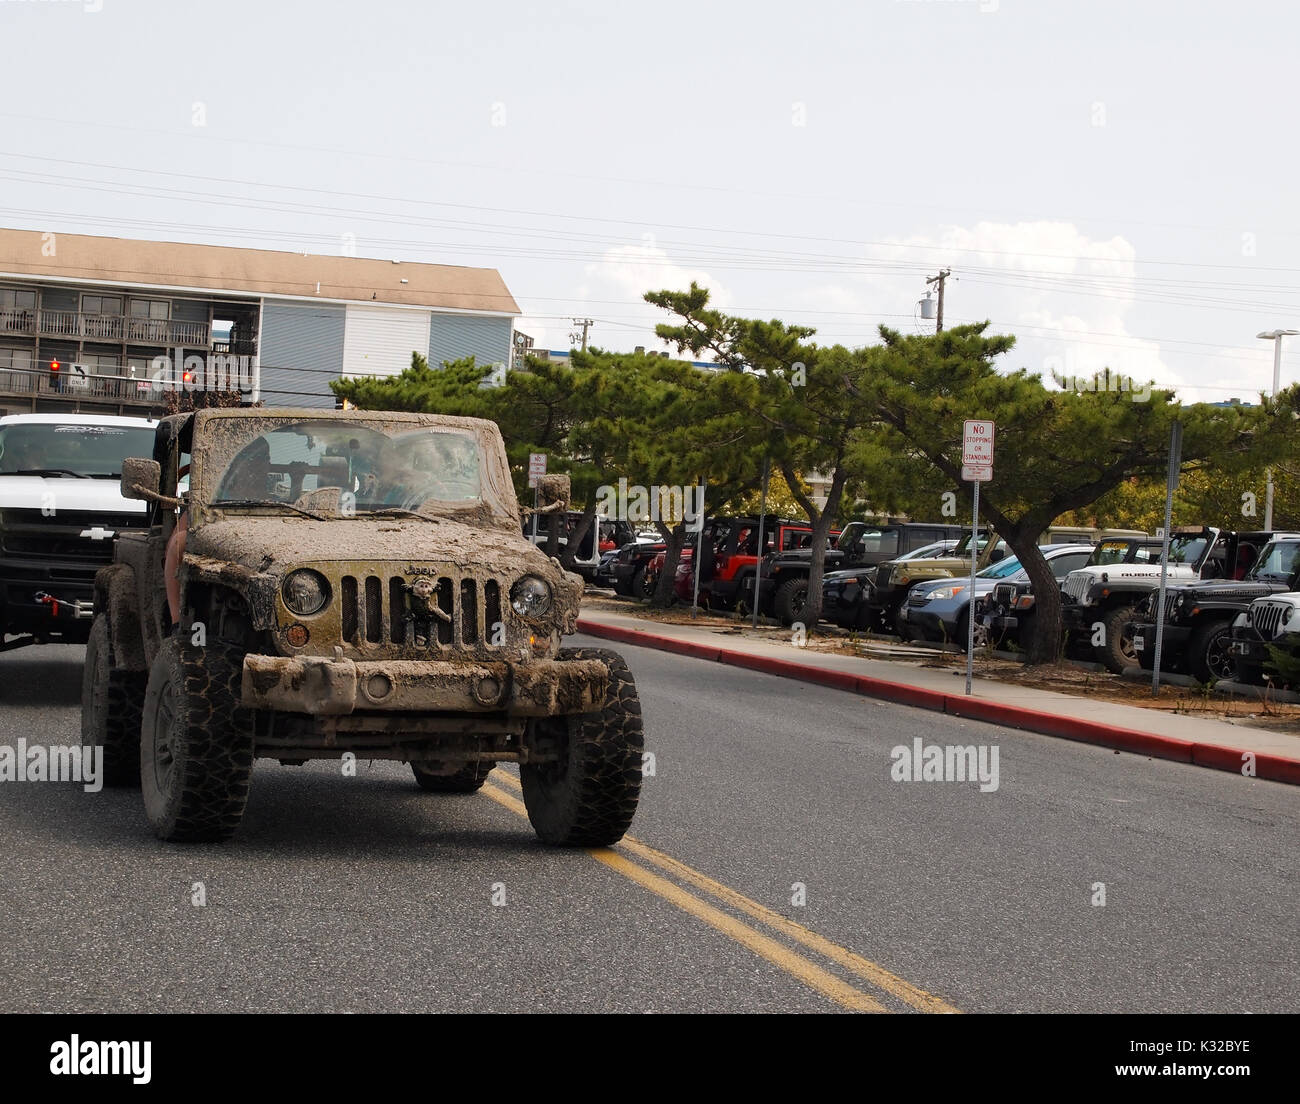 OCEAN CITY, MD - AUGUST 26, 2017: A vintage Jeep covered thick dried mud arrives at the Roland E. Powell Convention Center on Saturday afternoon of Je Stock Photo